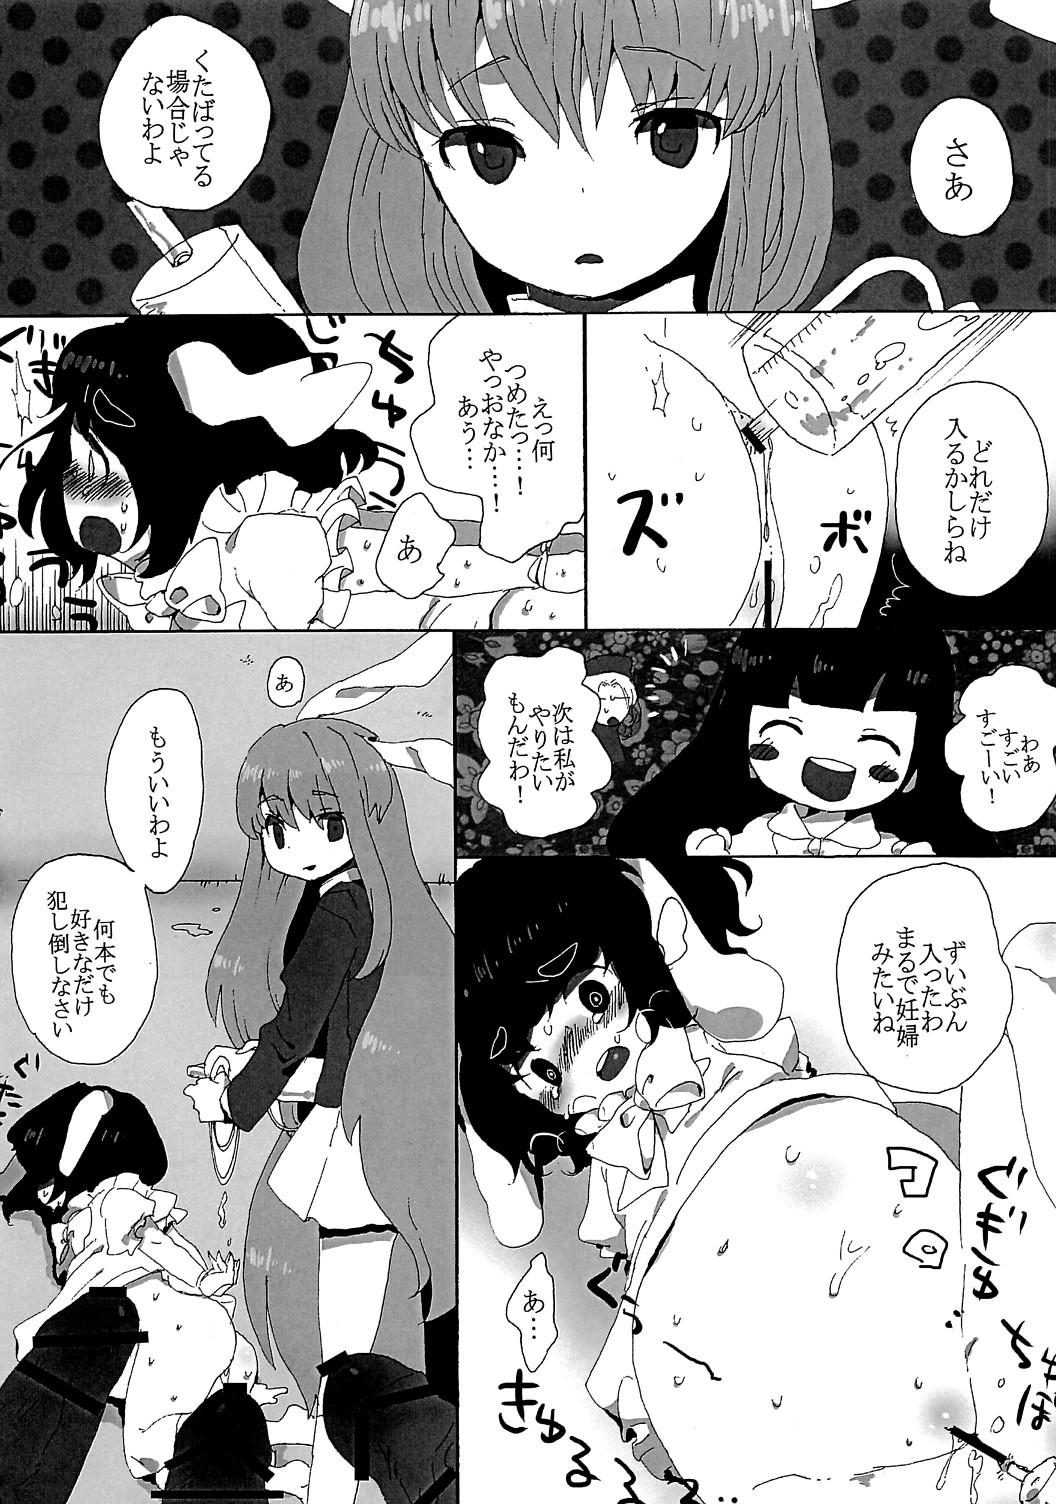 Hot Mom rumor the second - Touhou project Chacal - Page 8